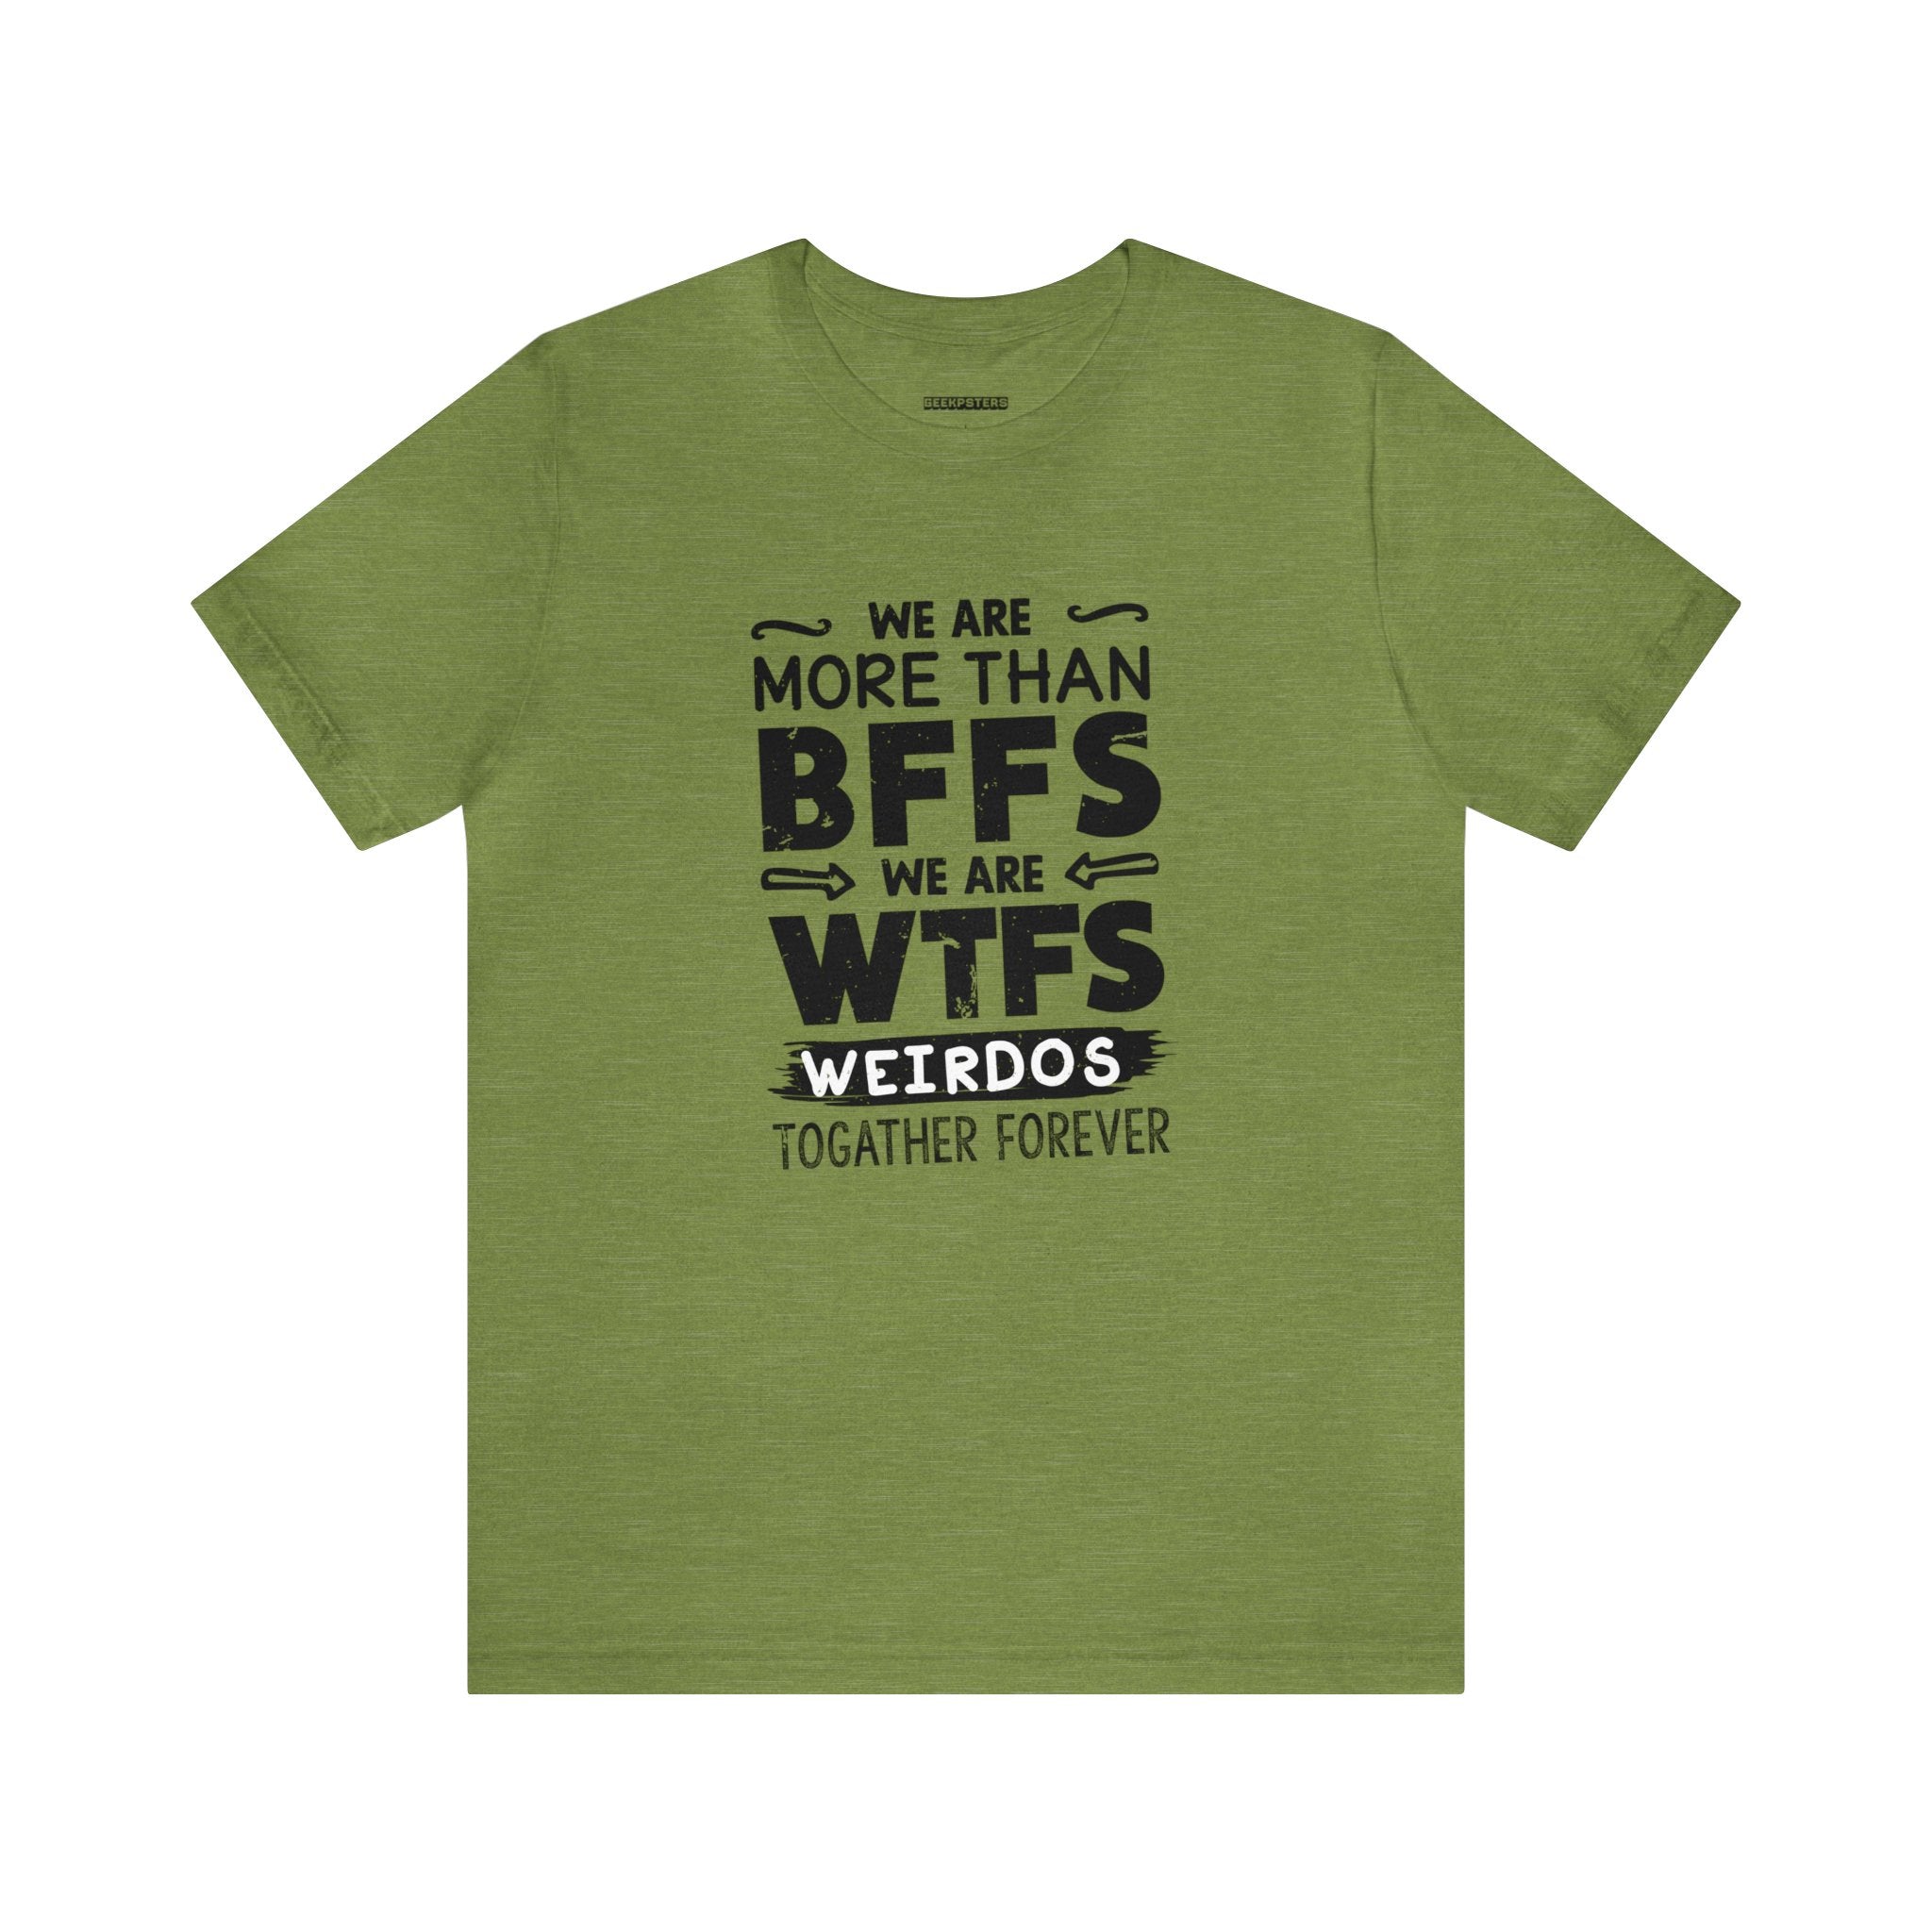 Order today for a We Are More T-Shirt that says "I'm more than BFFs - BFFs forever.